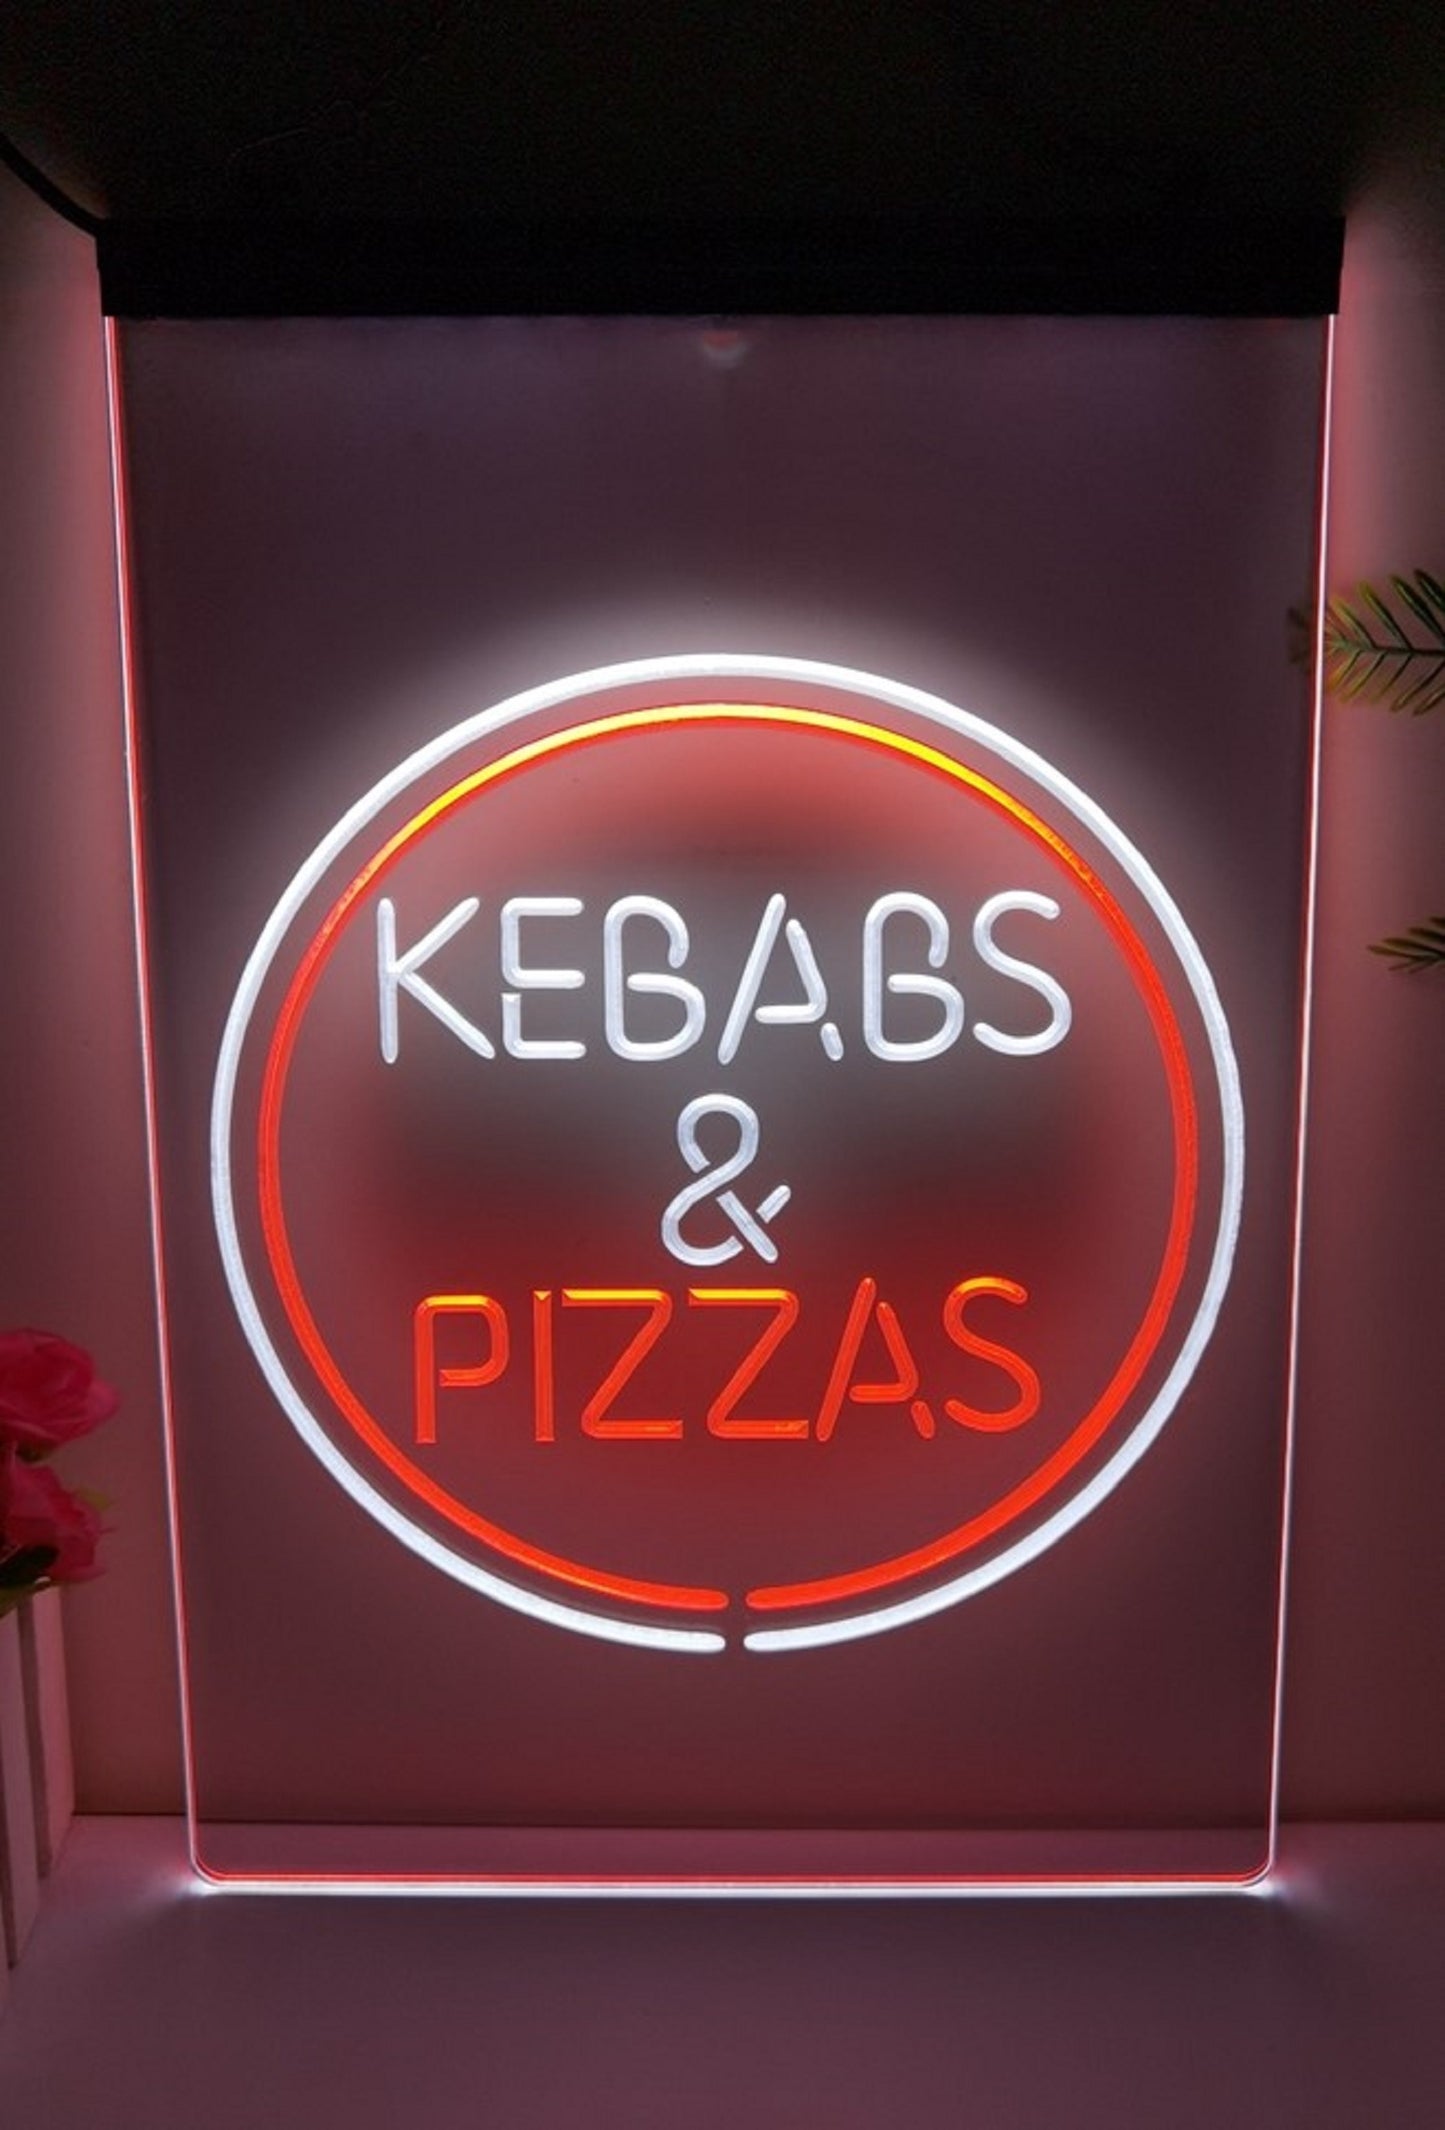 Neon Sign Dual Color Kebabs & Pizzas Fast Food Kebab Pizza Restaurant Decor